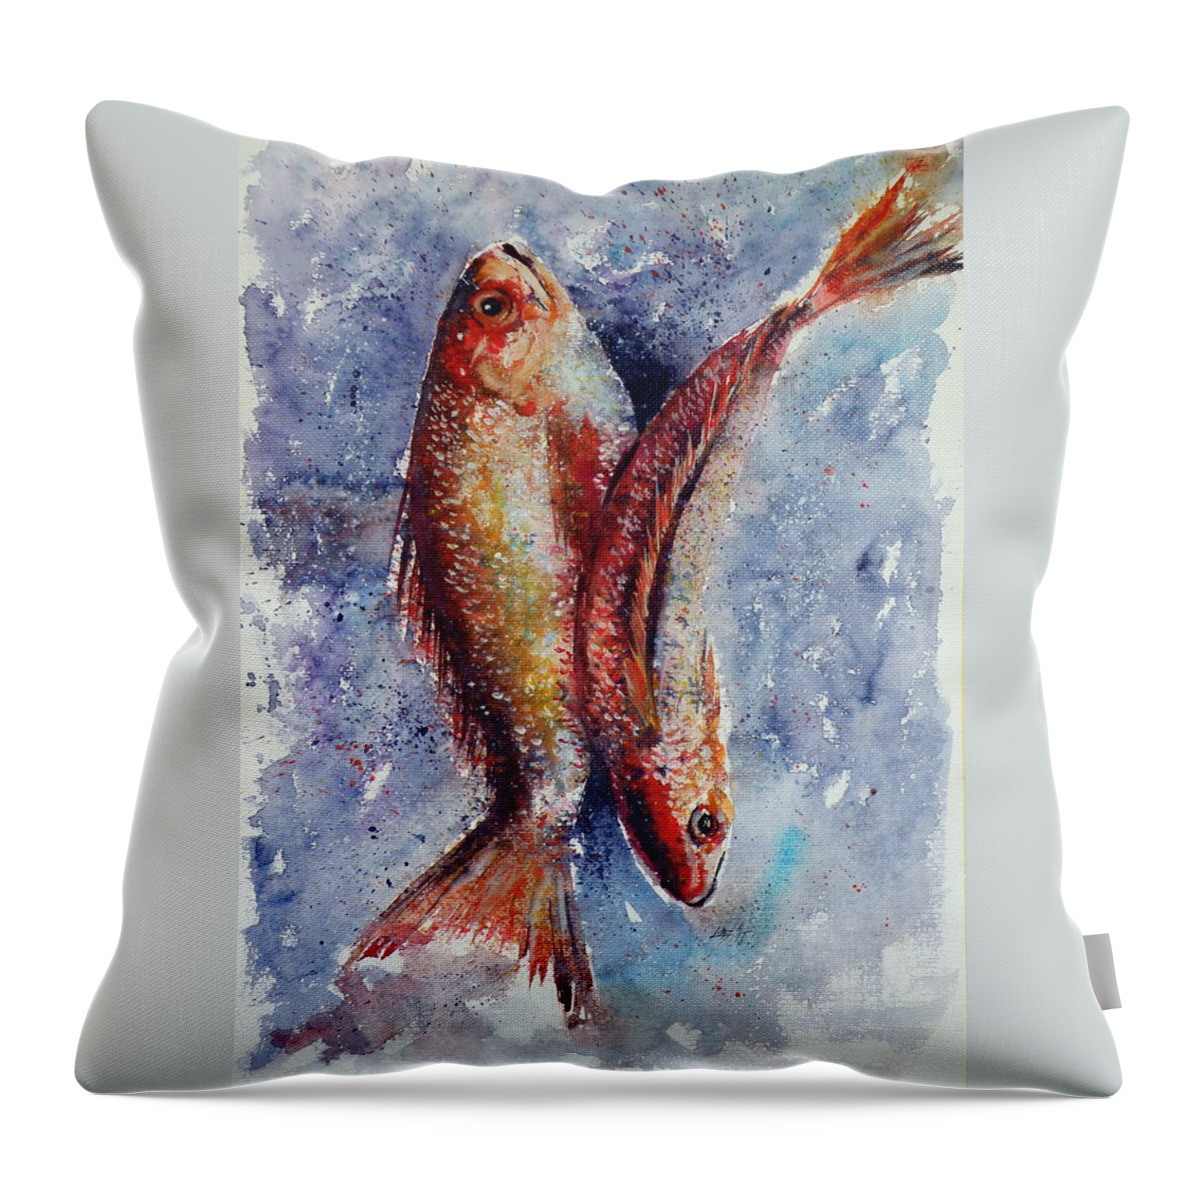 Fish Throw Pillow featuring the painting Fish by Kovacs Anna Brigitta